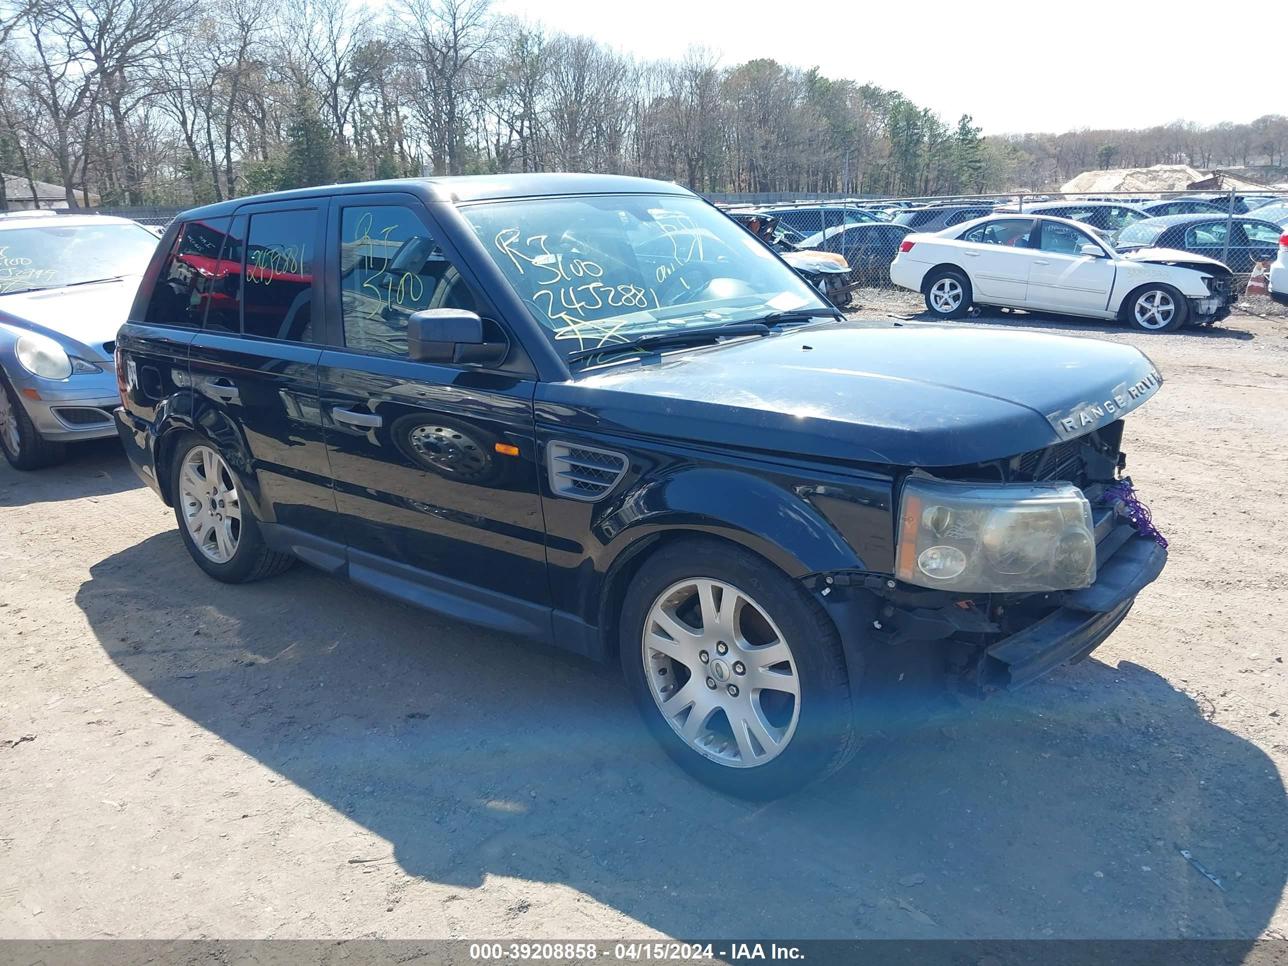 vin: SALSF254X6A967919 SALSF254X6A967919 2006 land rover range rover sport 4400 for Sale in 11763, 156 Peconic Ave, Medford, New York, USA